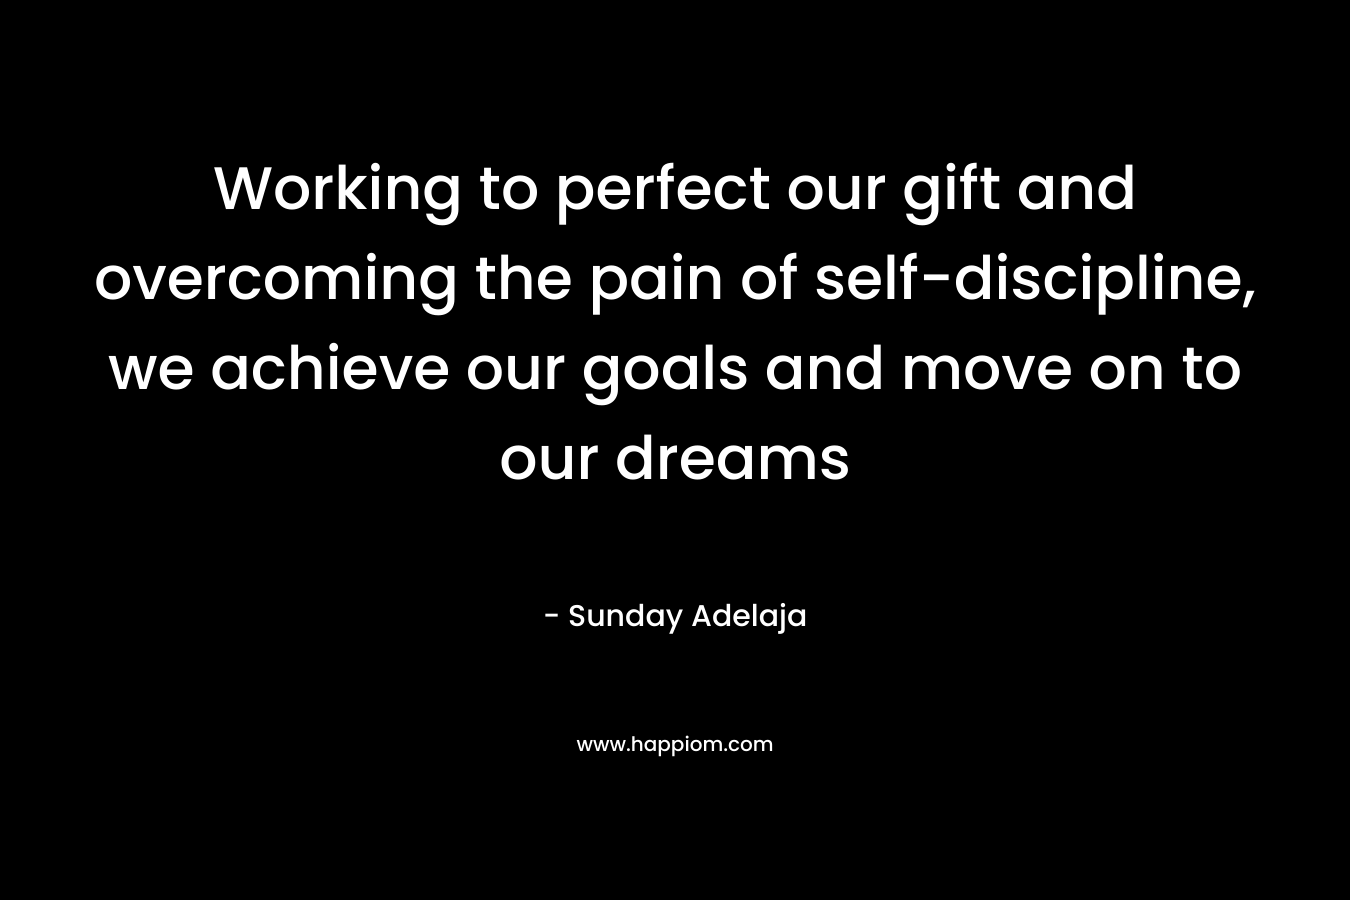 Working to perfect our gift and overcoming the pain of self-discipline, we achieve our goals and move on to our dreams